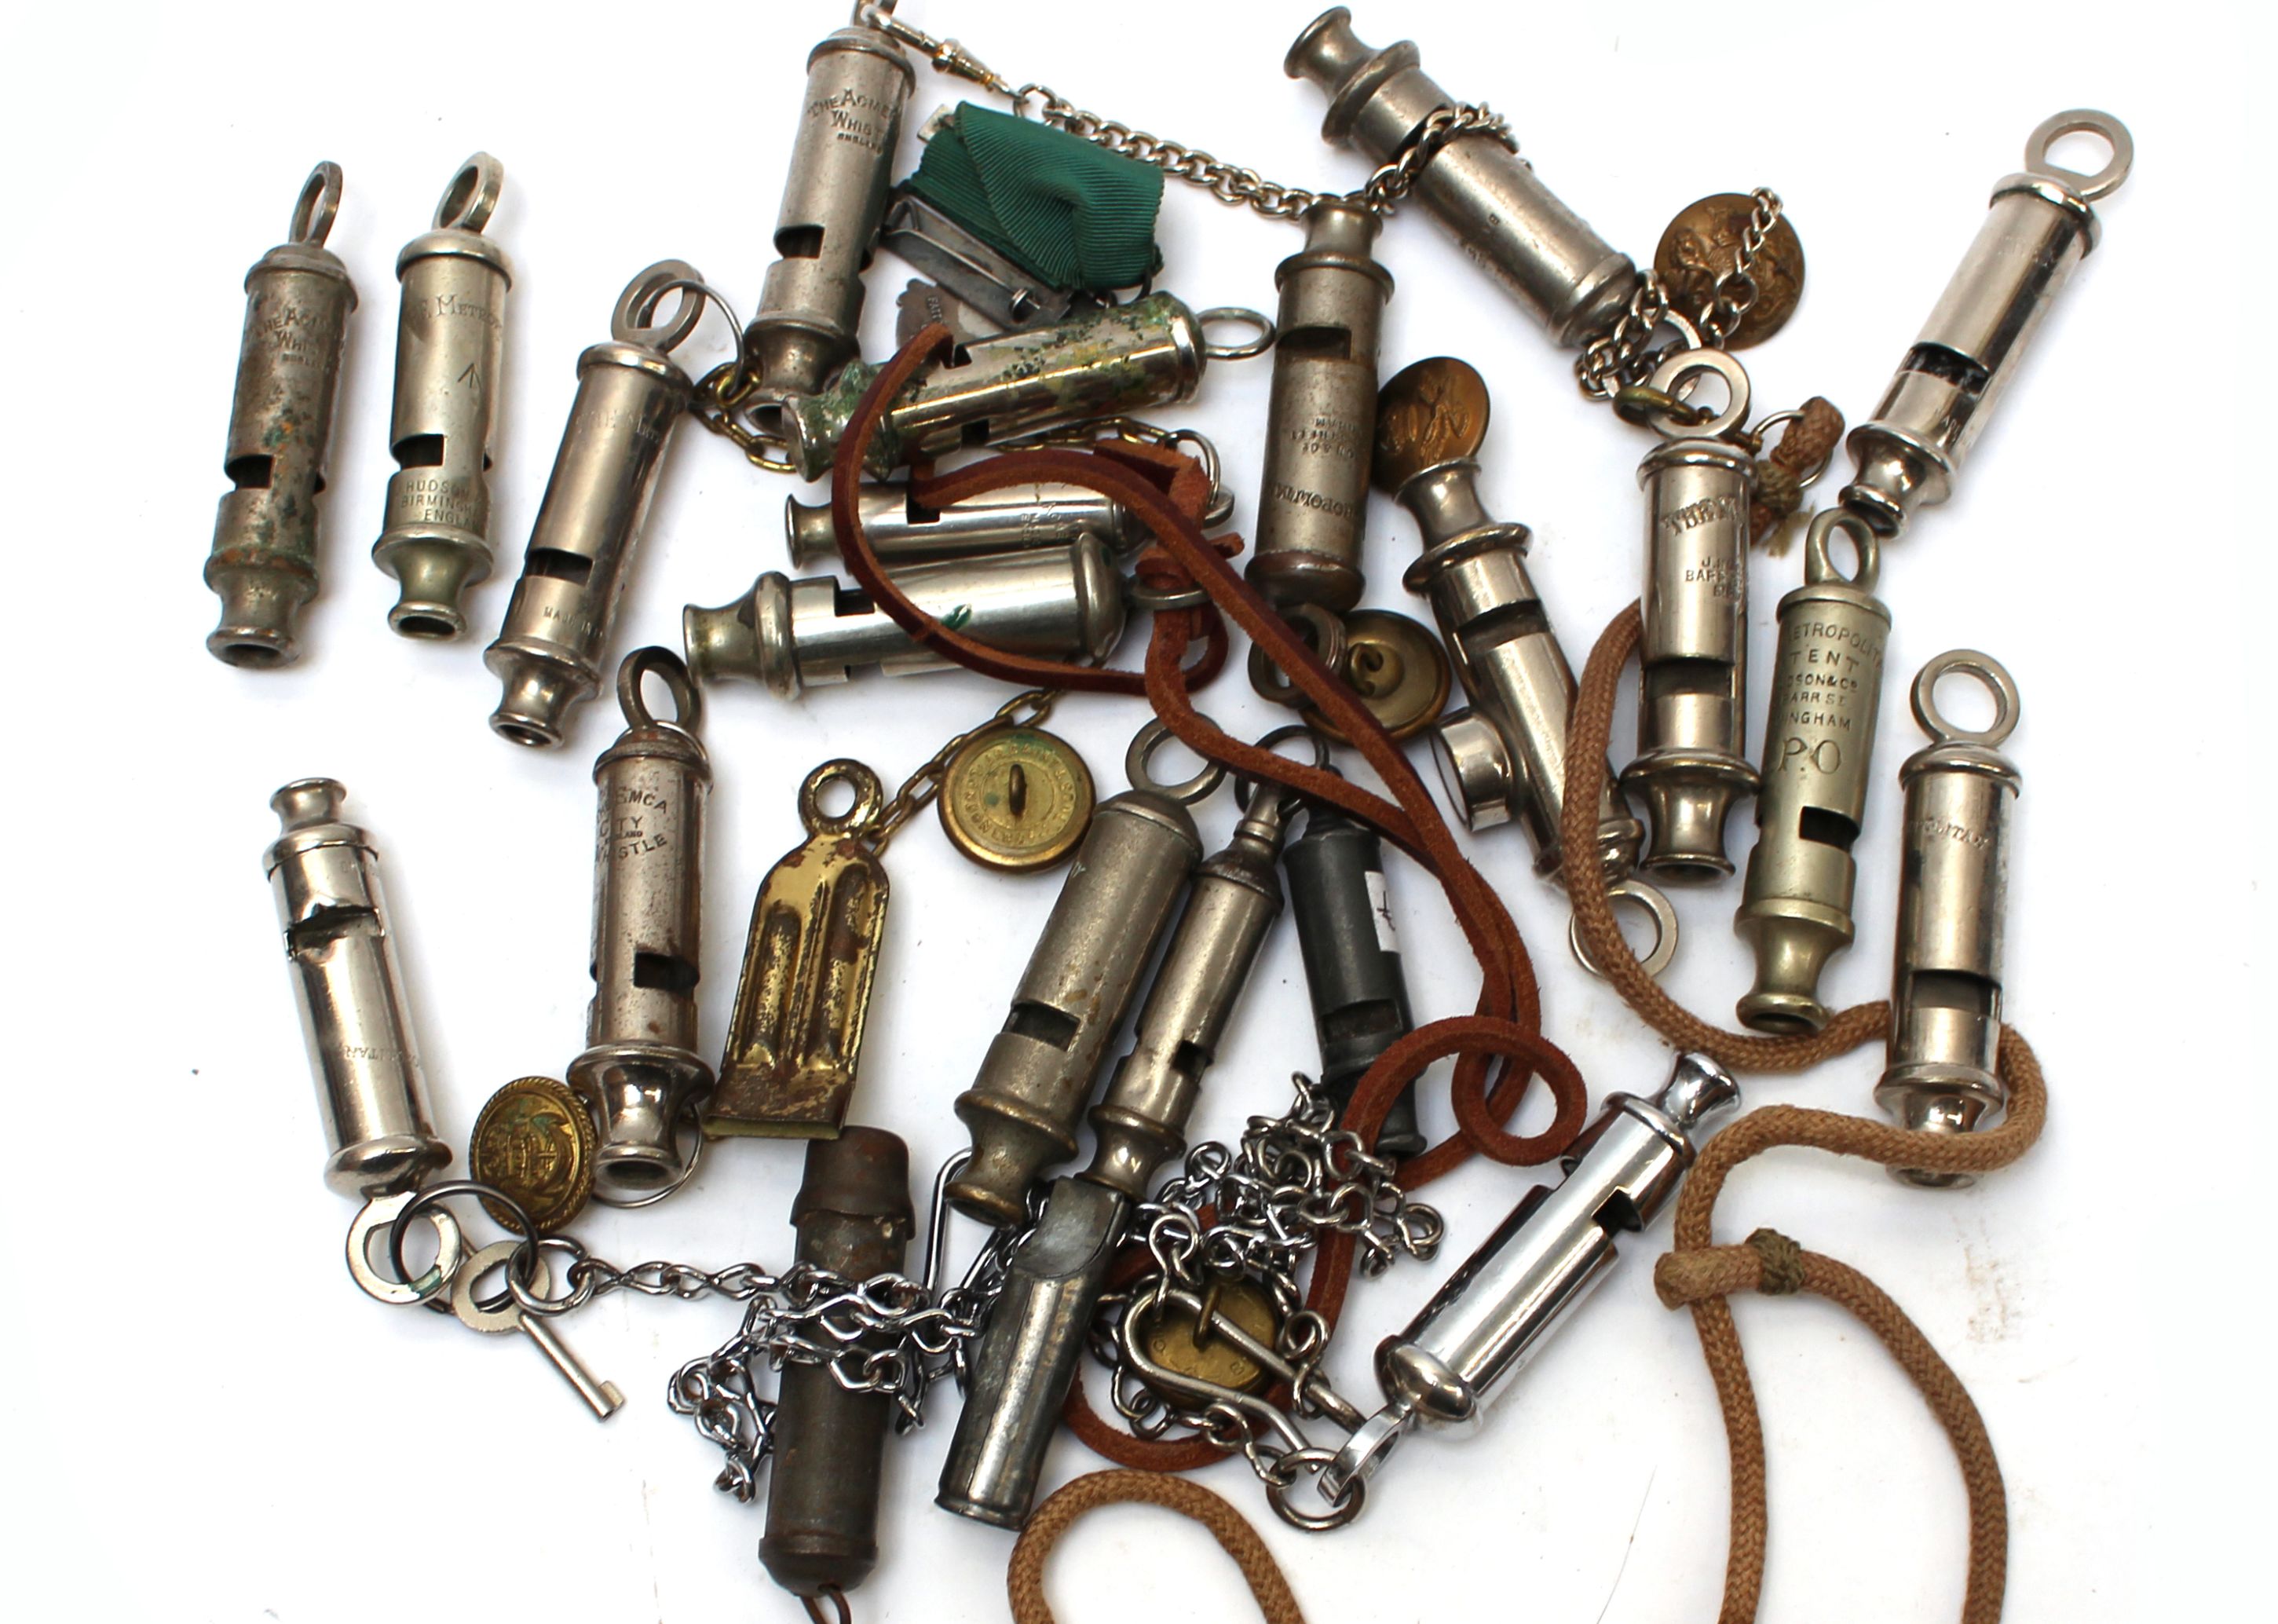 23 vintage whistles to include 10 x The Acme and J. Hudson & Co. 'The Metropolitan', 4 x The Acme '